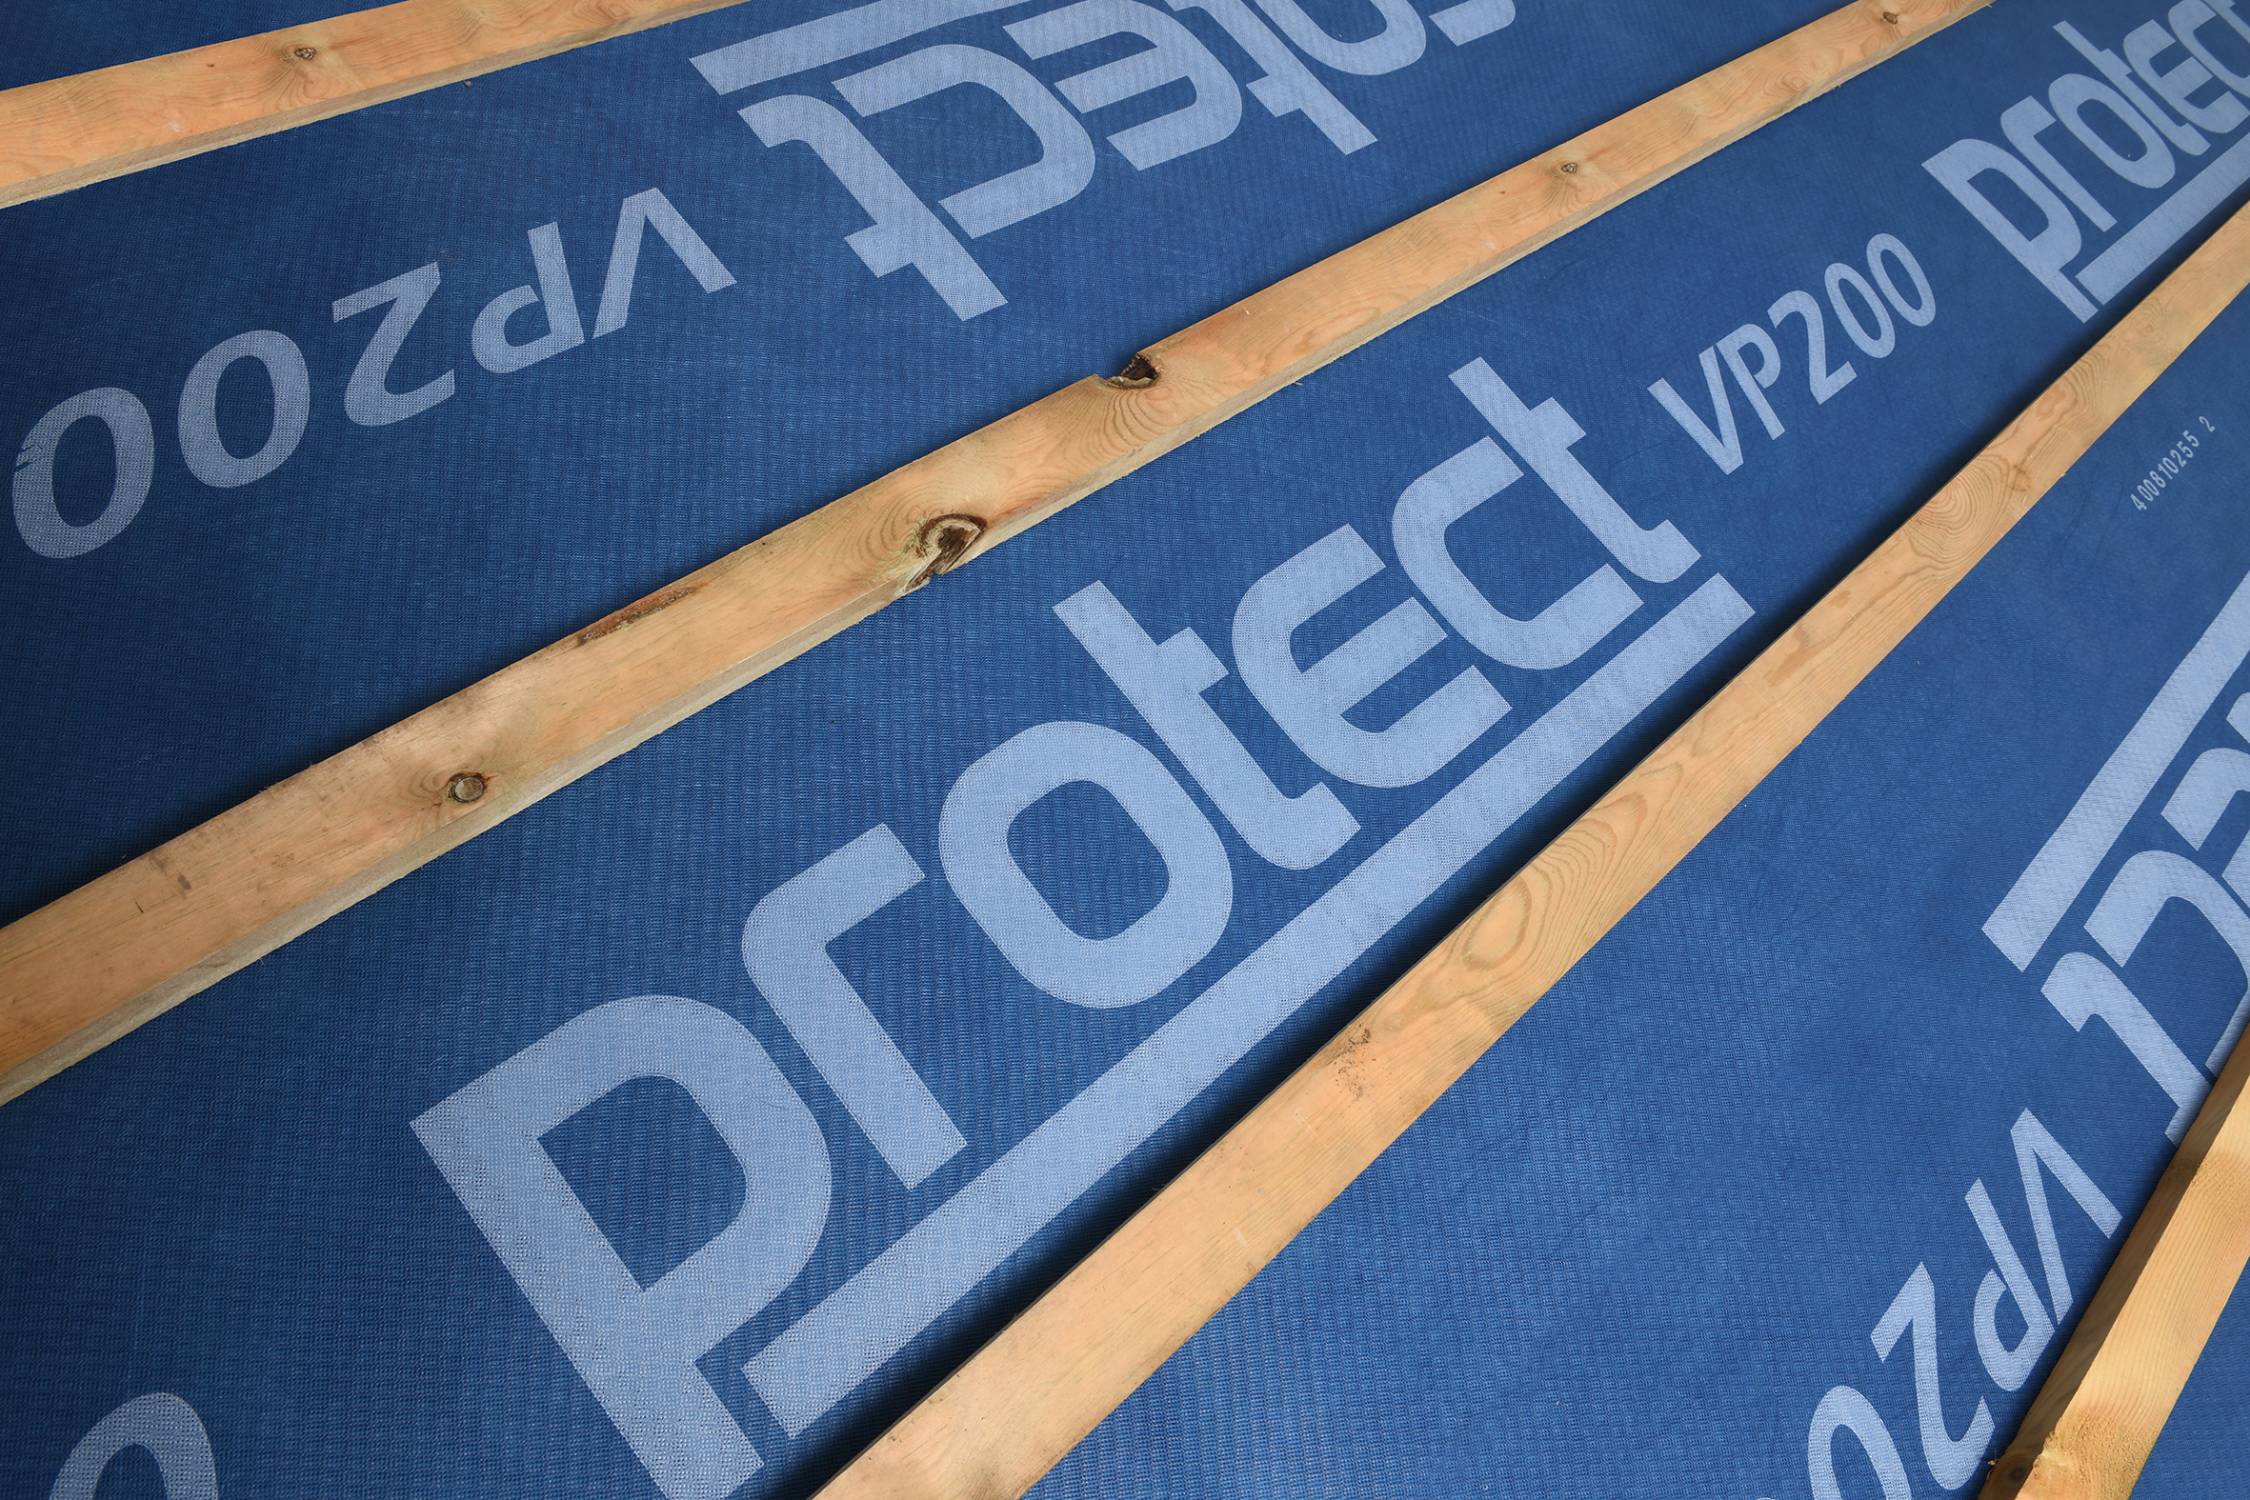 Glidevale Protect VP200  - Breathable Roofing Underlay